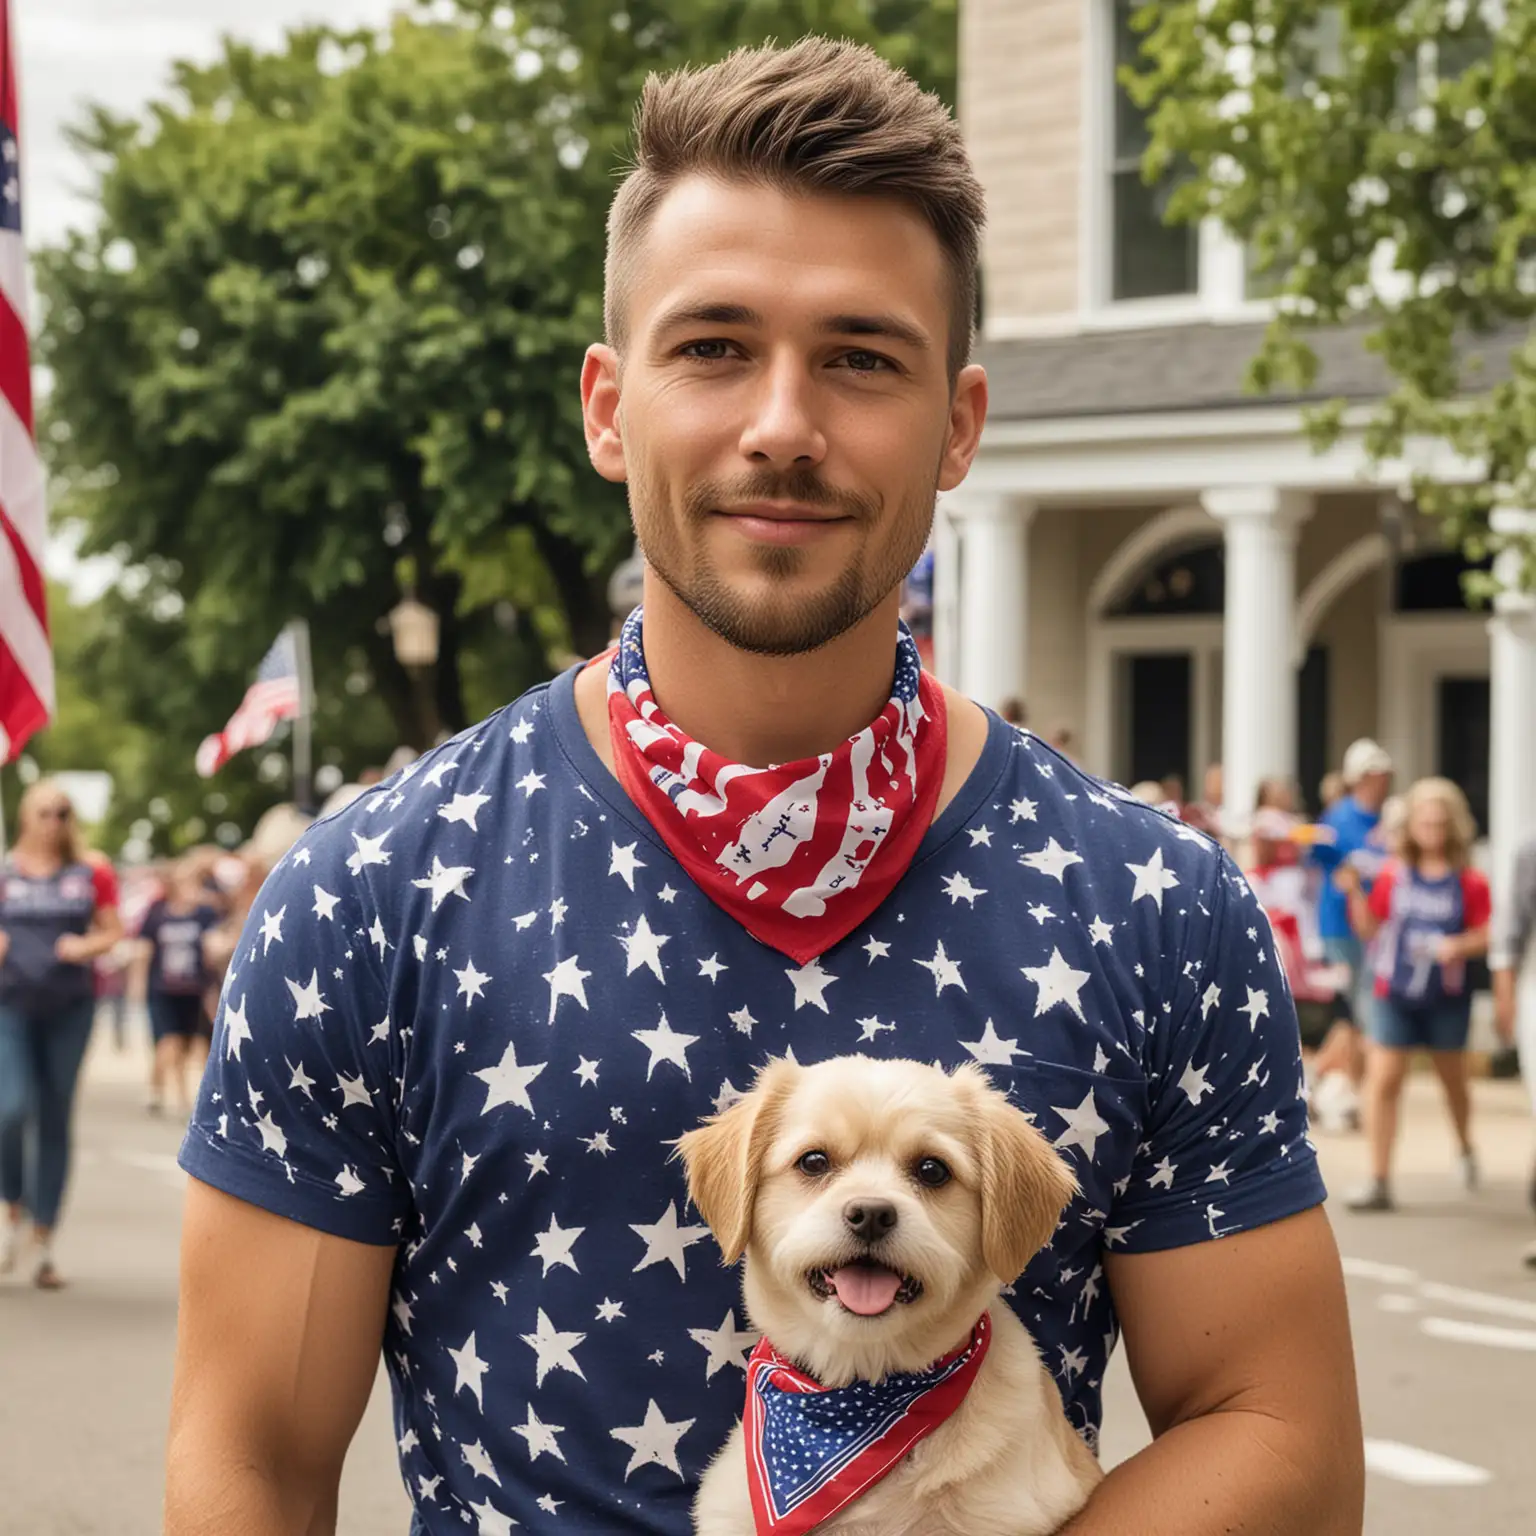 A handsome man dressed in a patriotic t-shirt,  with a dog with a flag bandana and a parade in the background